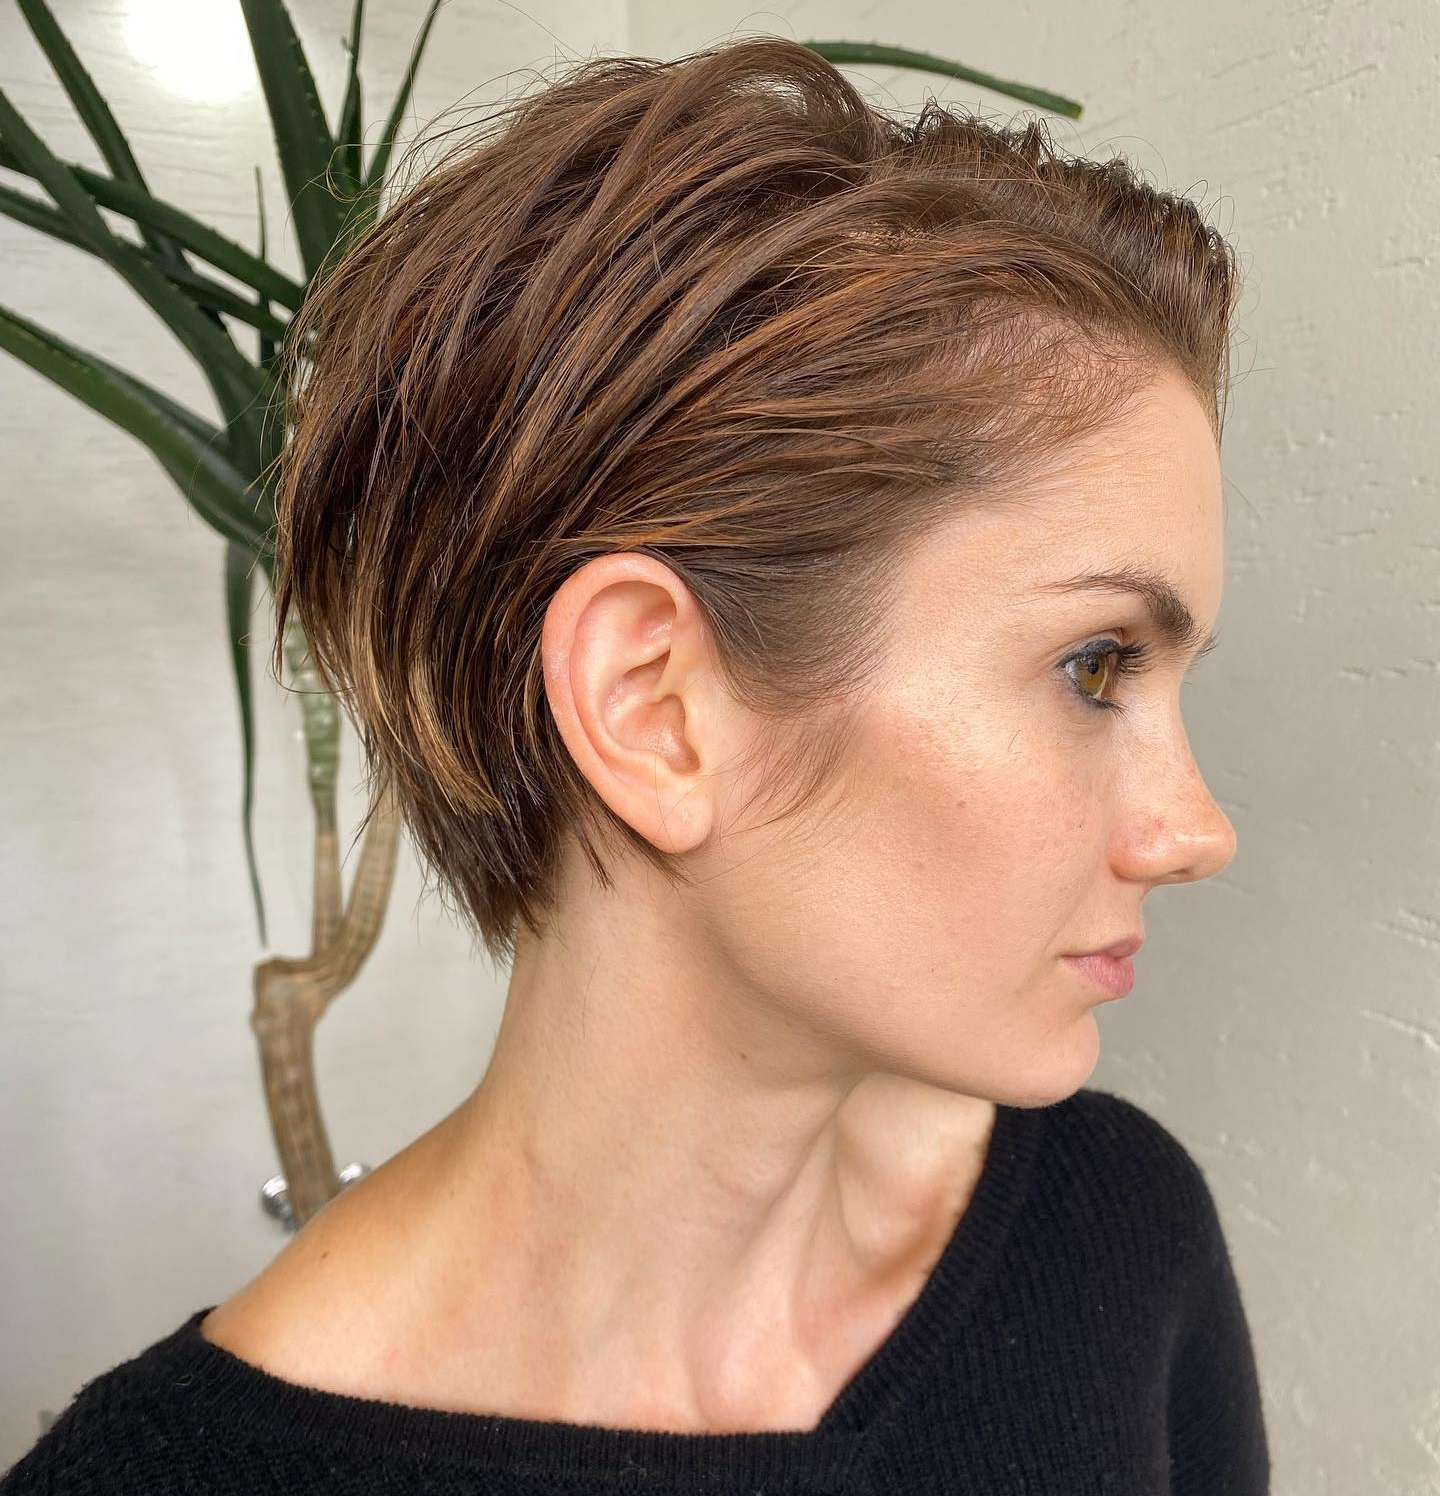 Short Pixie Cut Combed to the Side with Wet Hair Effect